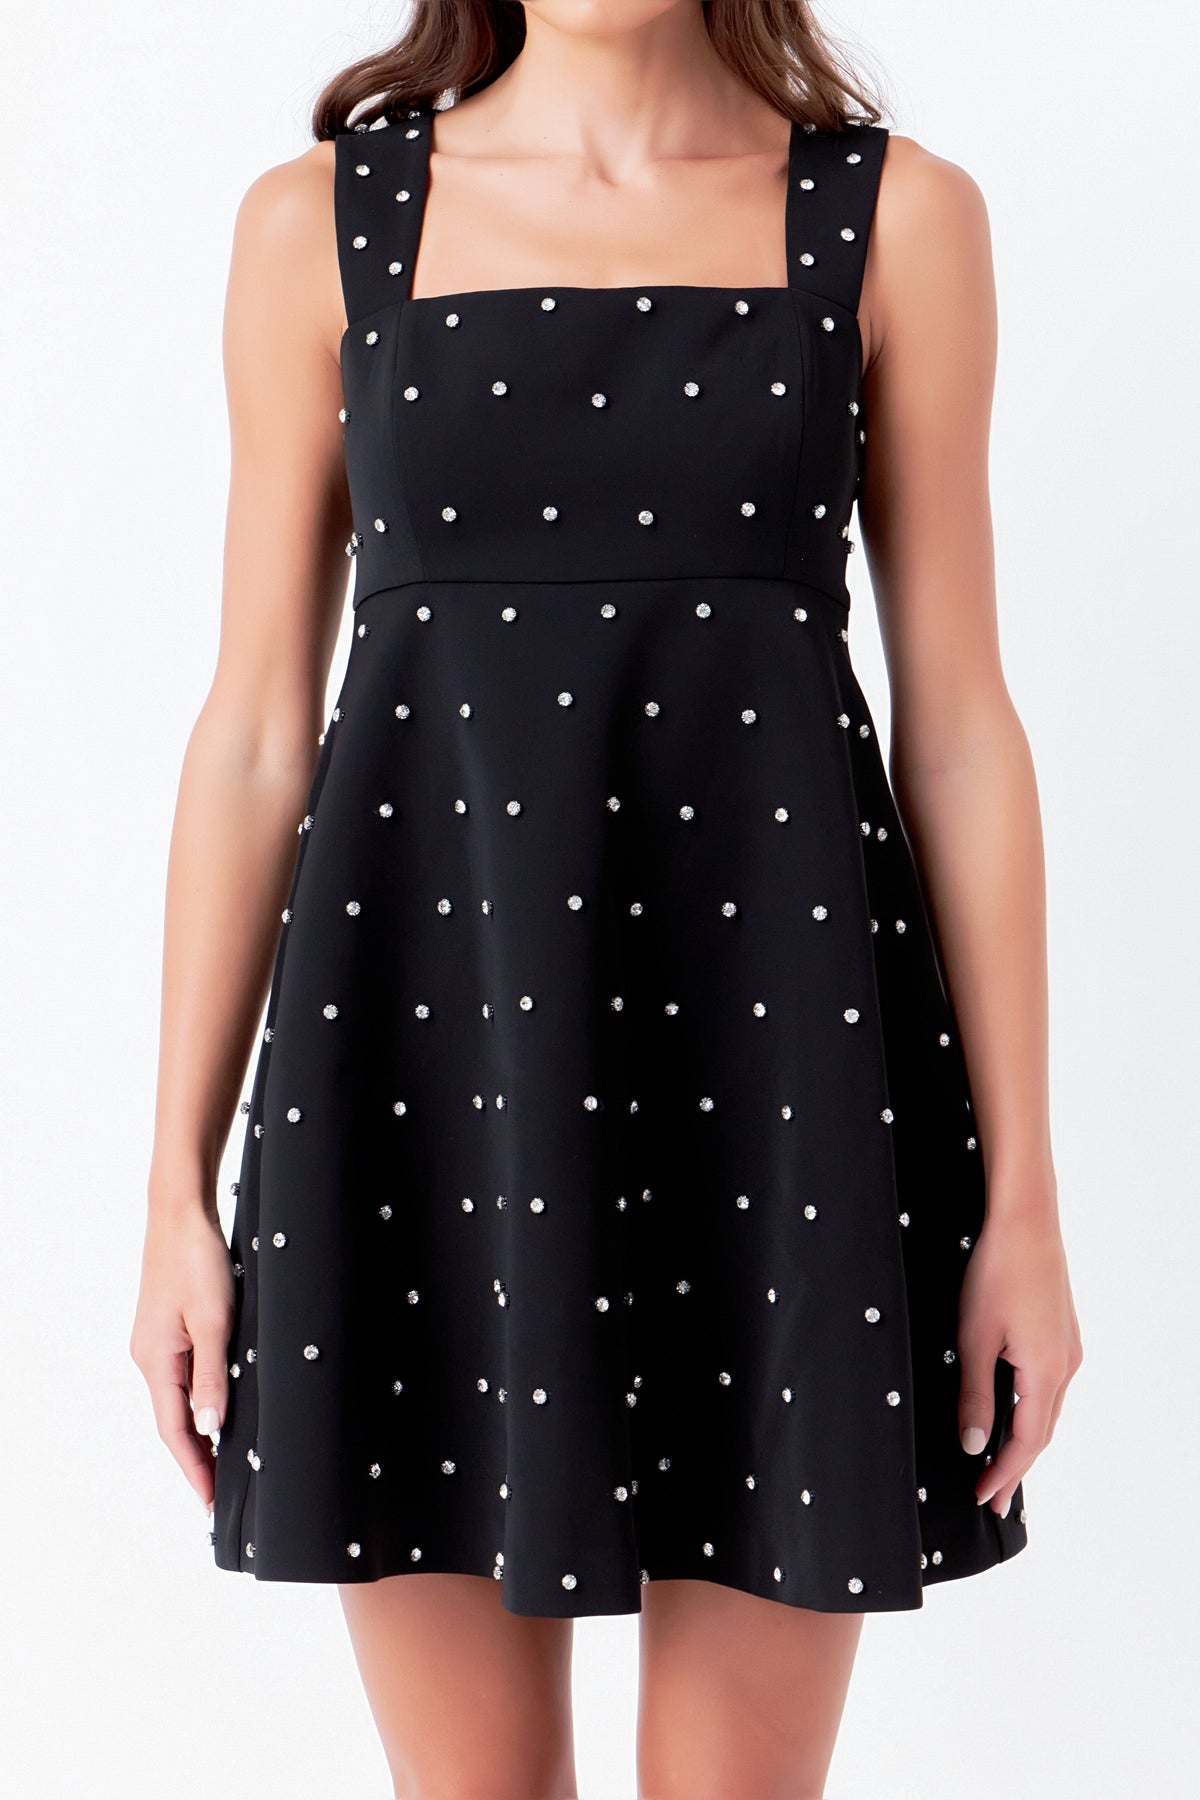 ENDLESS ROSE - Premium Embellished Mini Dress - DRESSES available at Objectrare